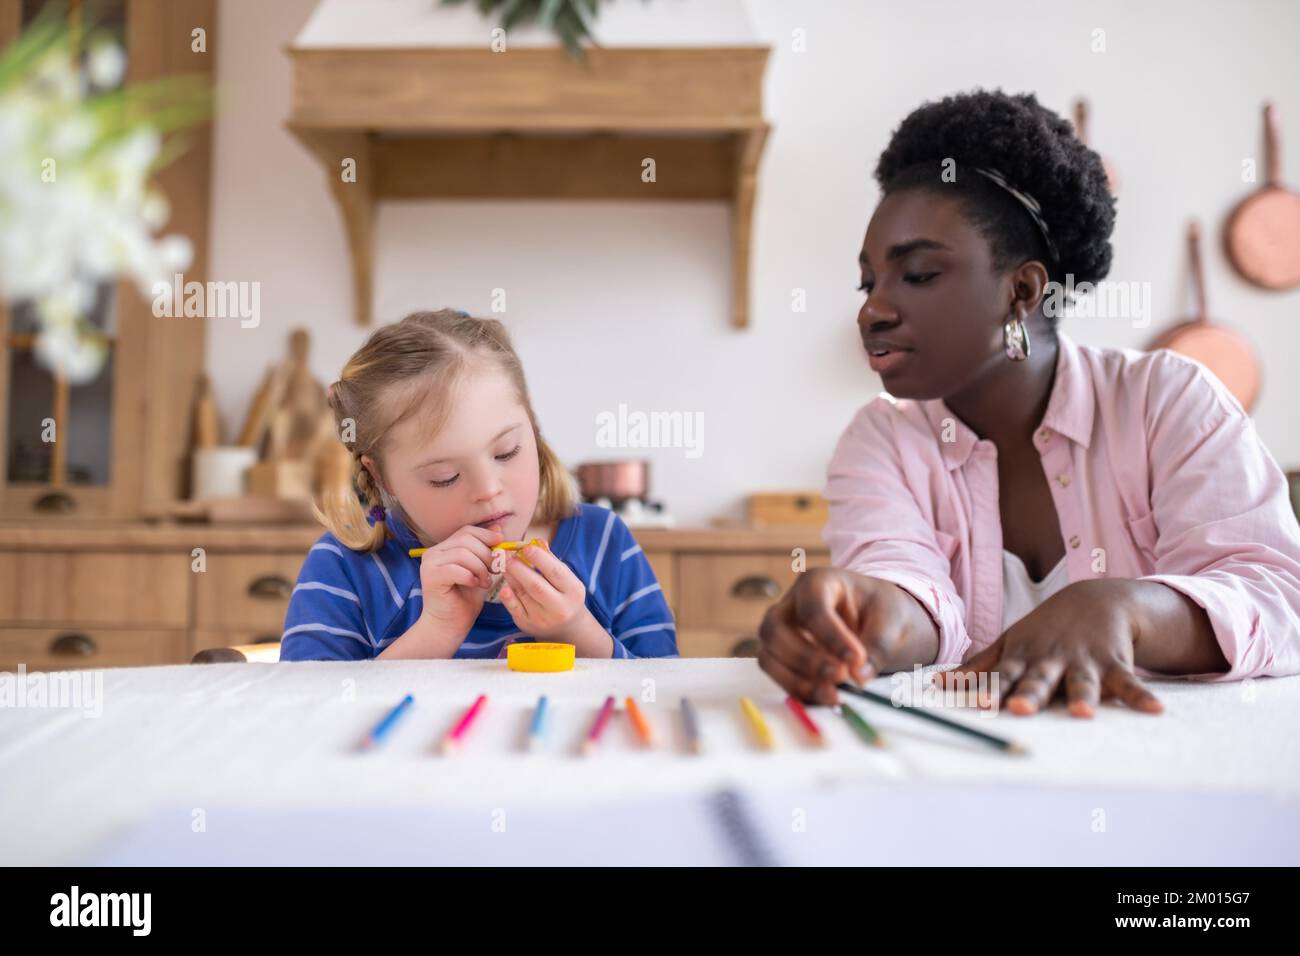 Markers And An Open Blank Drawing Pad Bright Colored Pencils Are Lying On  The Table Next To Him Childrens Creativity Hobbies School And Preschool  Education Drawing Lessons Back To School High-Res Stock